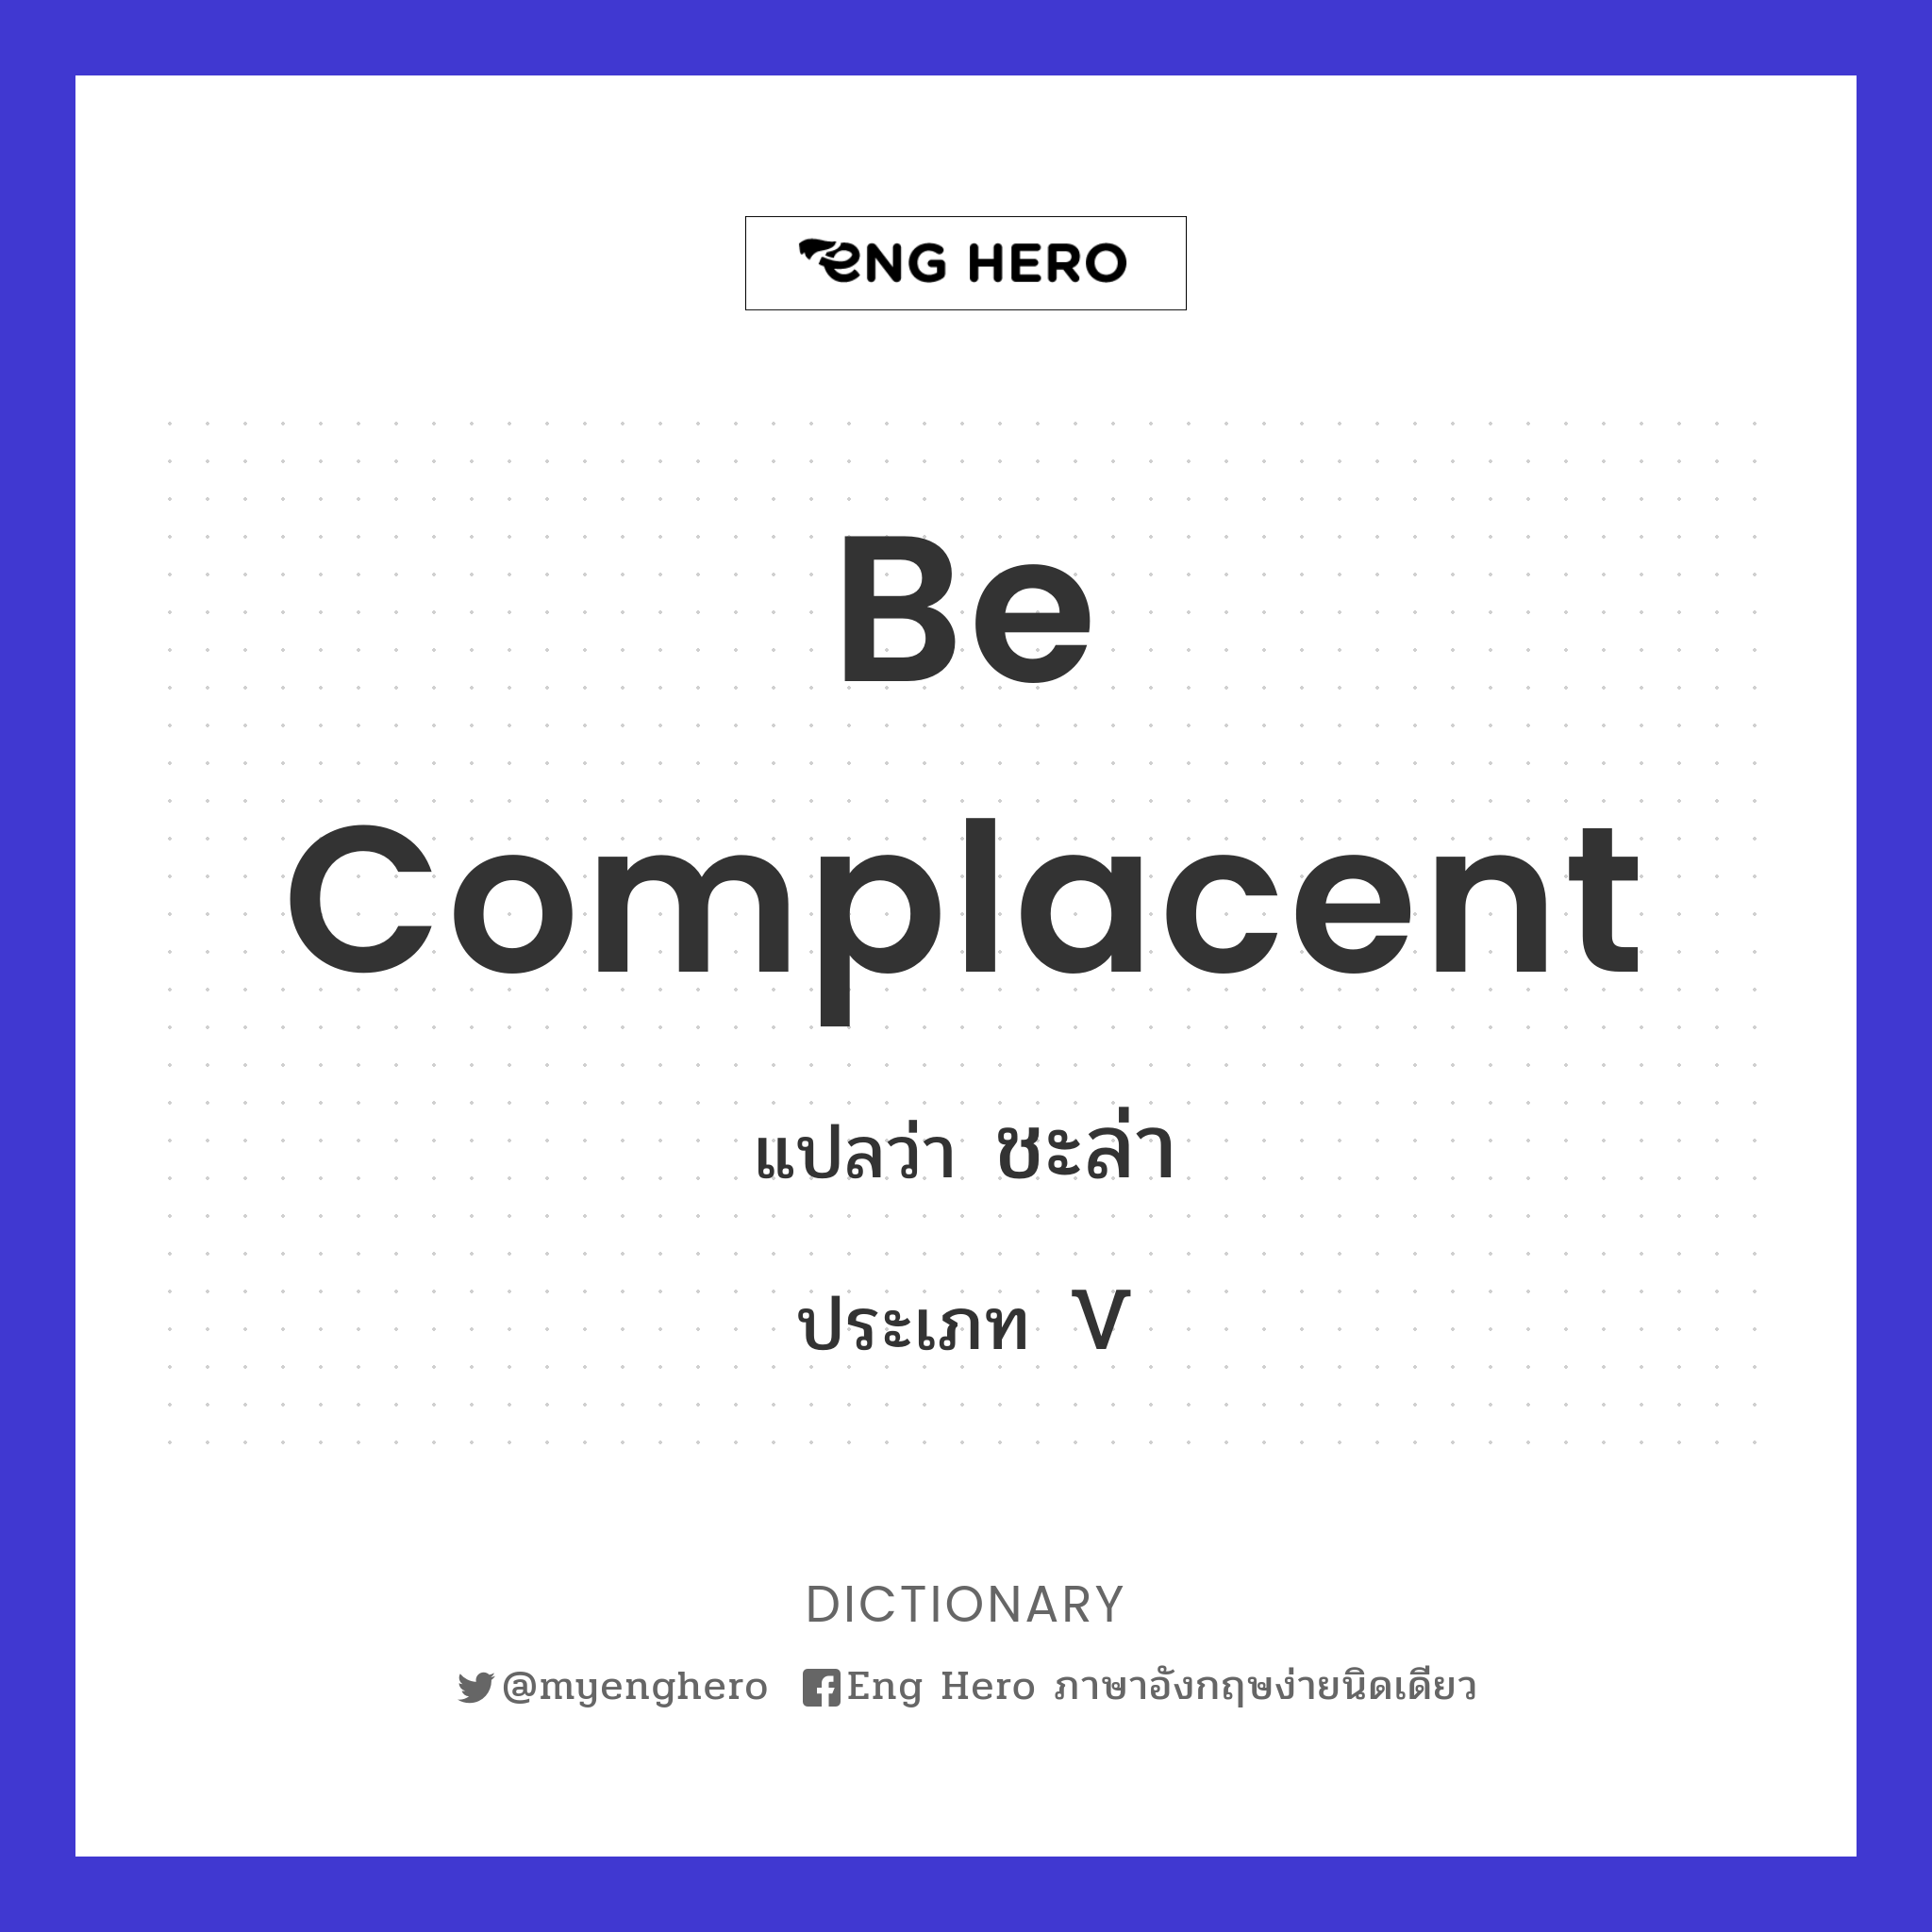 be complacent